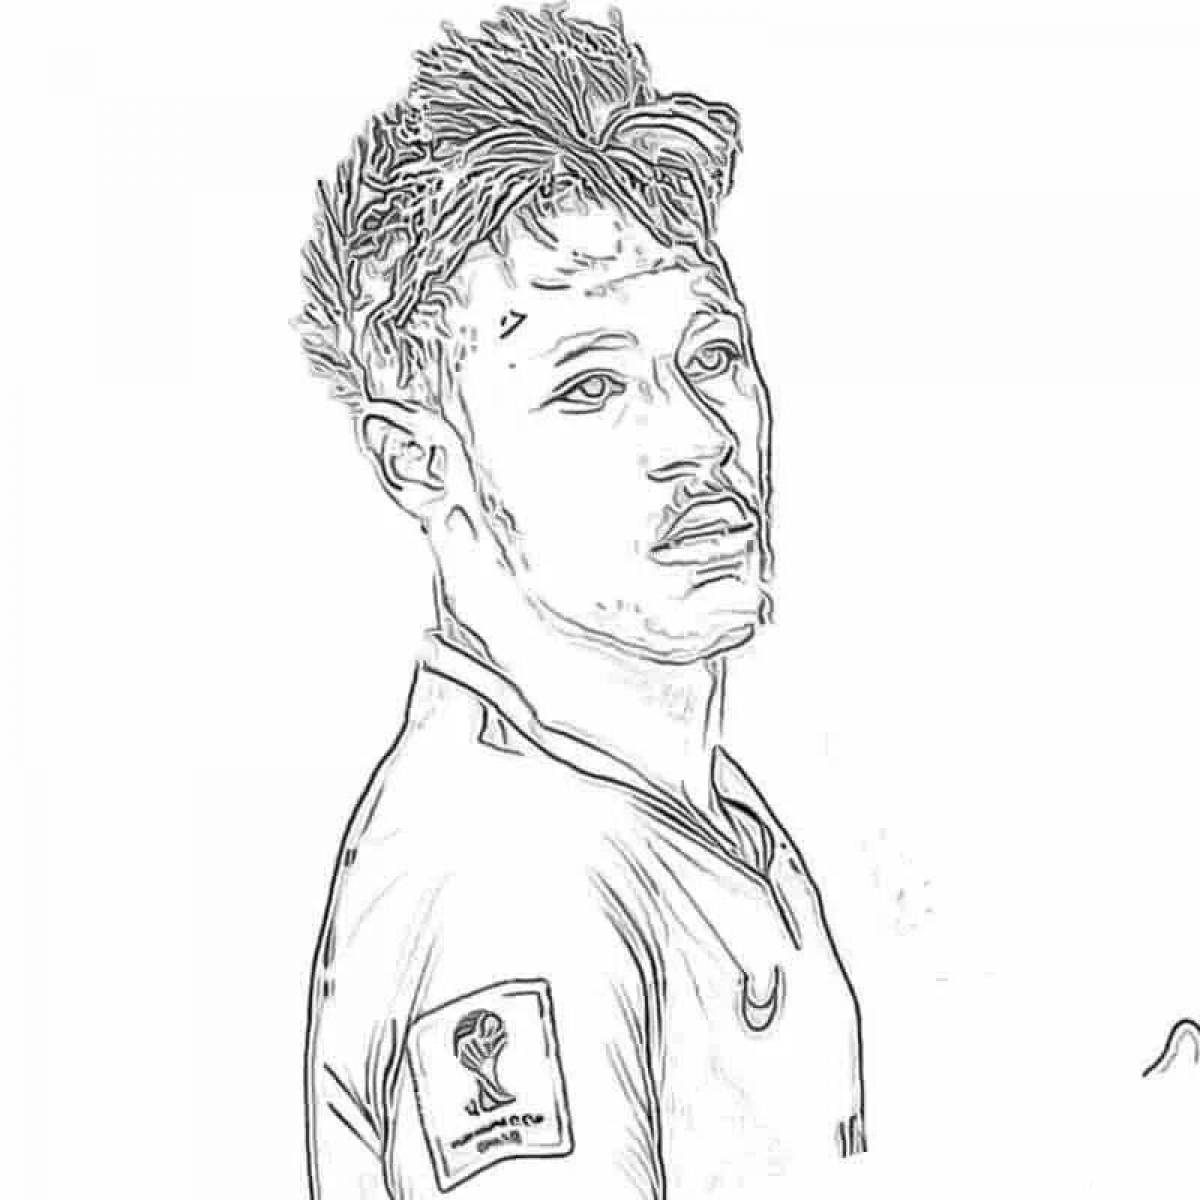 Neymar's exciting coloring book